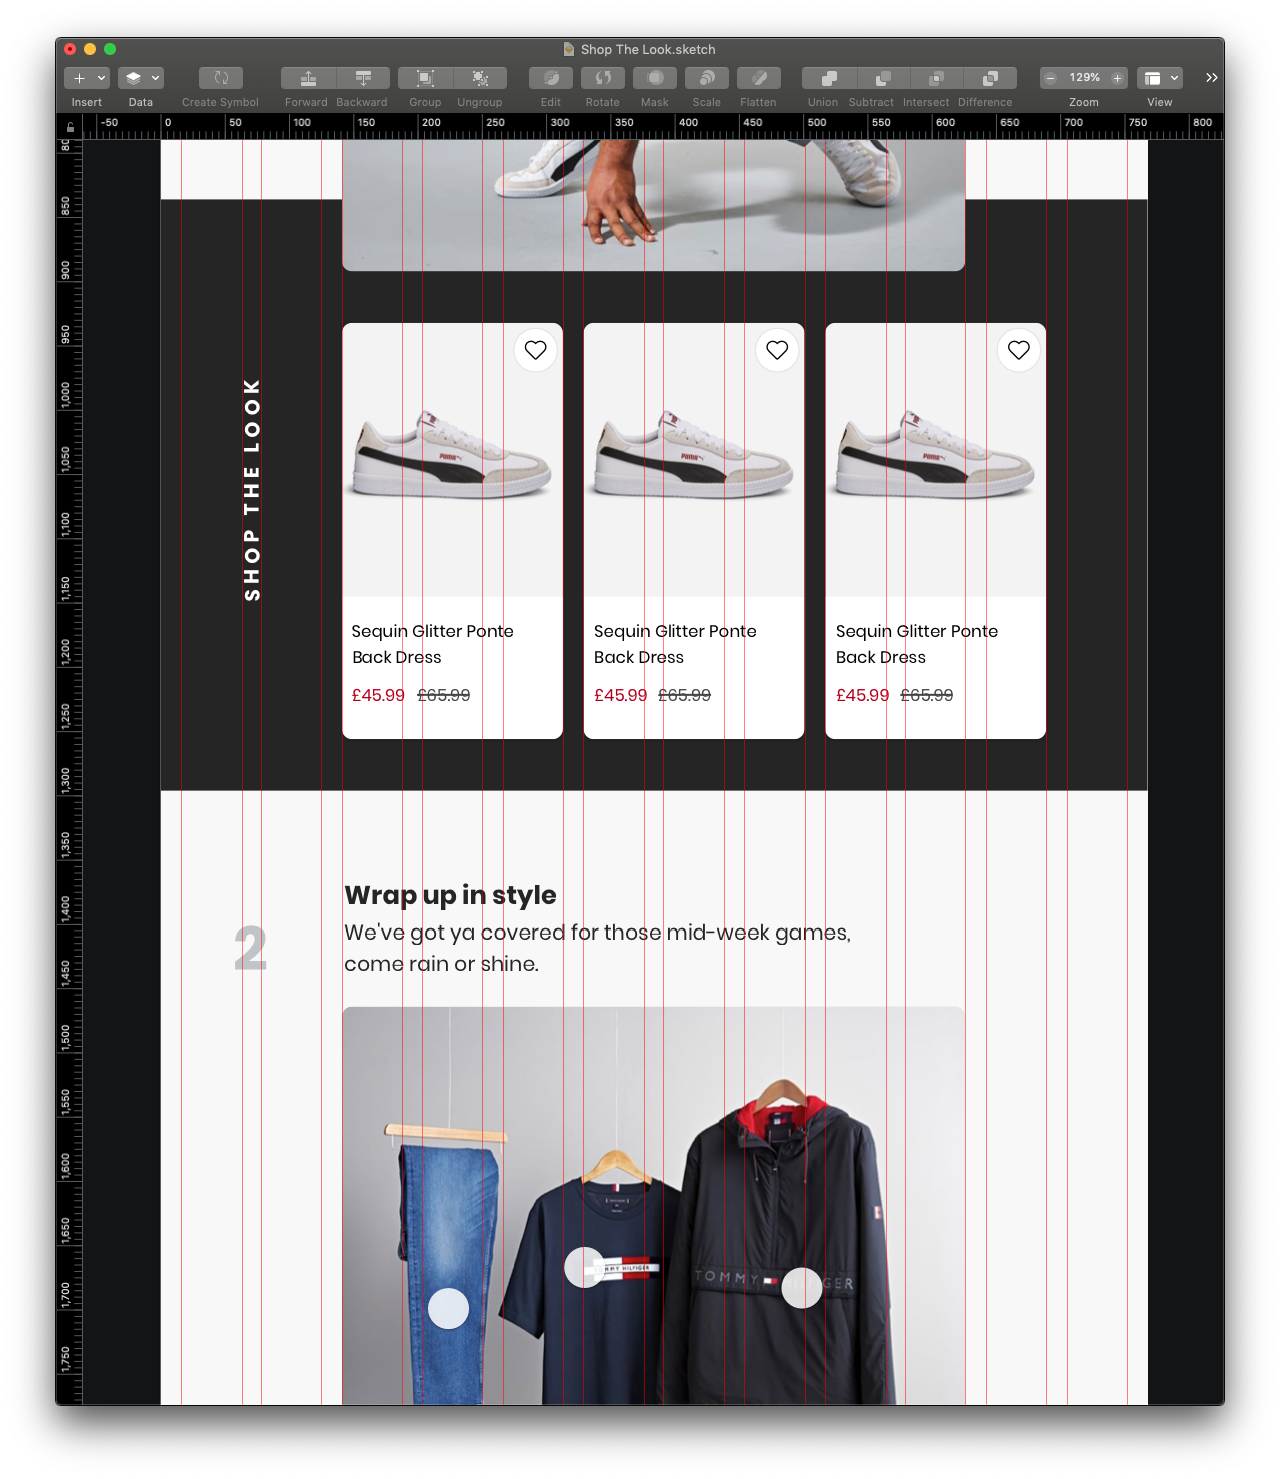 Screen shot taken from sketch of a "Shop The Look" app layout for tablet, the Column Grid layout overlay is visible.